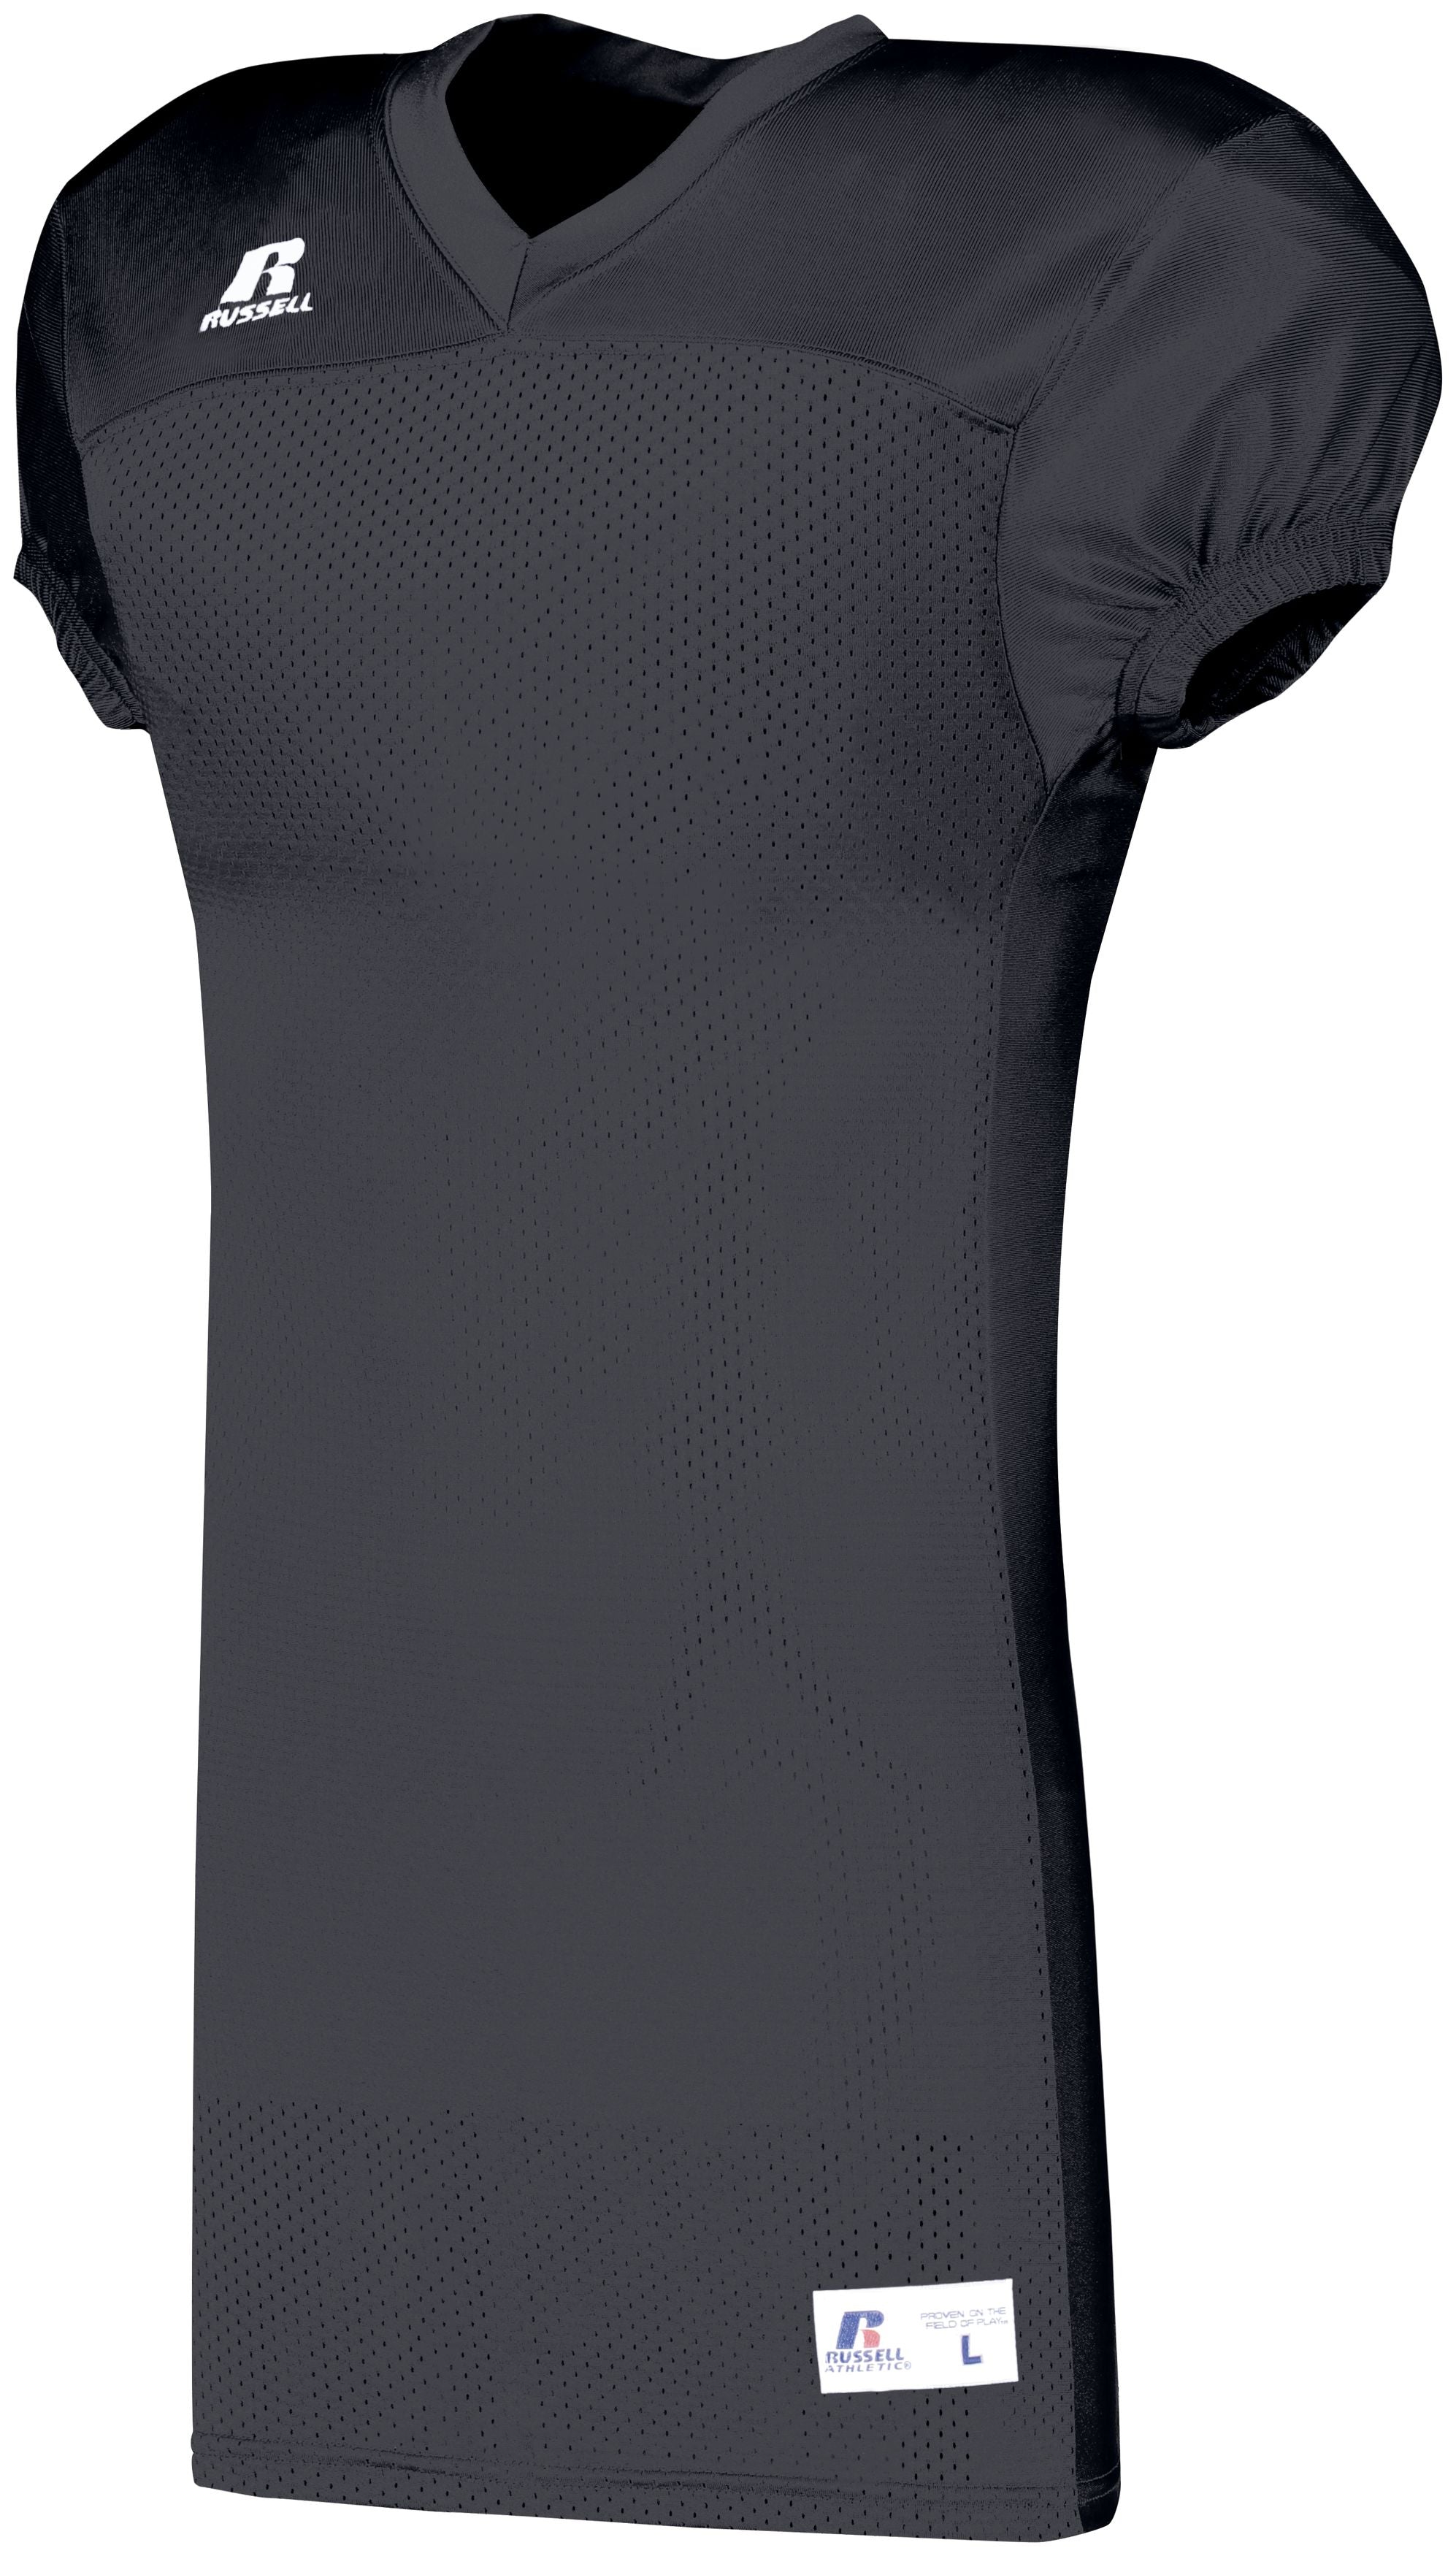 Russell Athletic Solid Jersey With Side Inserts in Stealth  -Part of the Adult, Adult-Jersey, Football, Russell-Athletic-Products, Shirts, All-Sports, All-Sports-1 product lines at KanaleyCreations.com